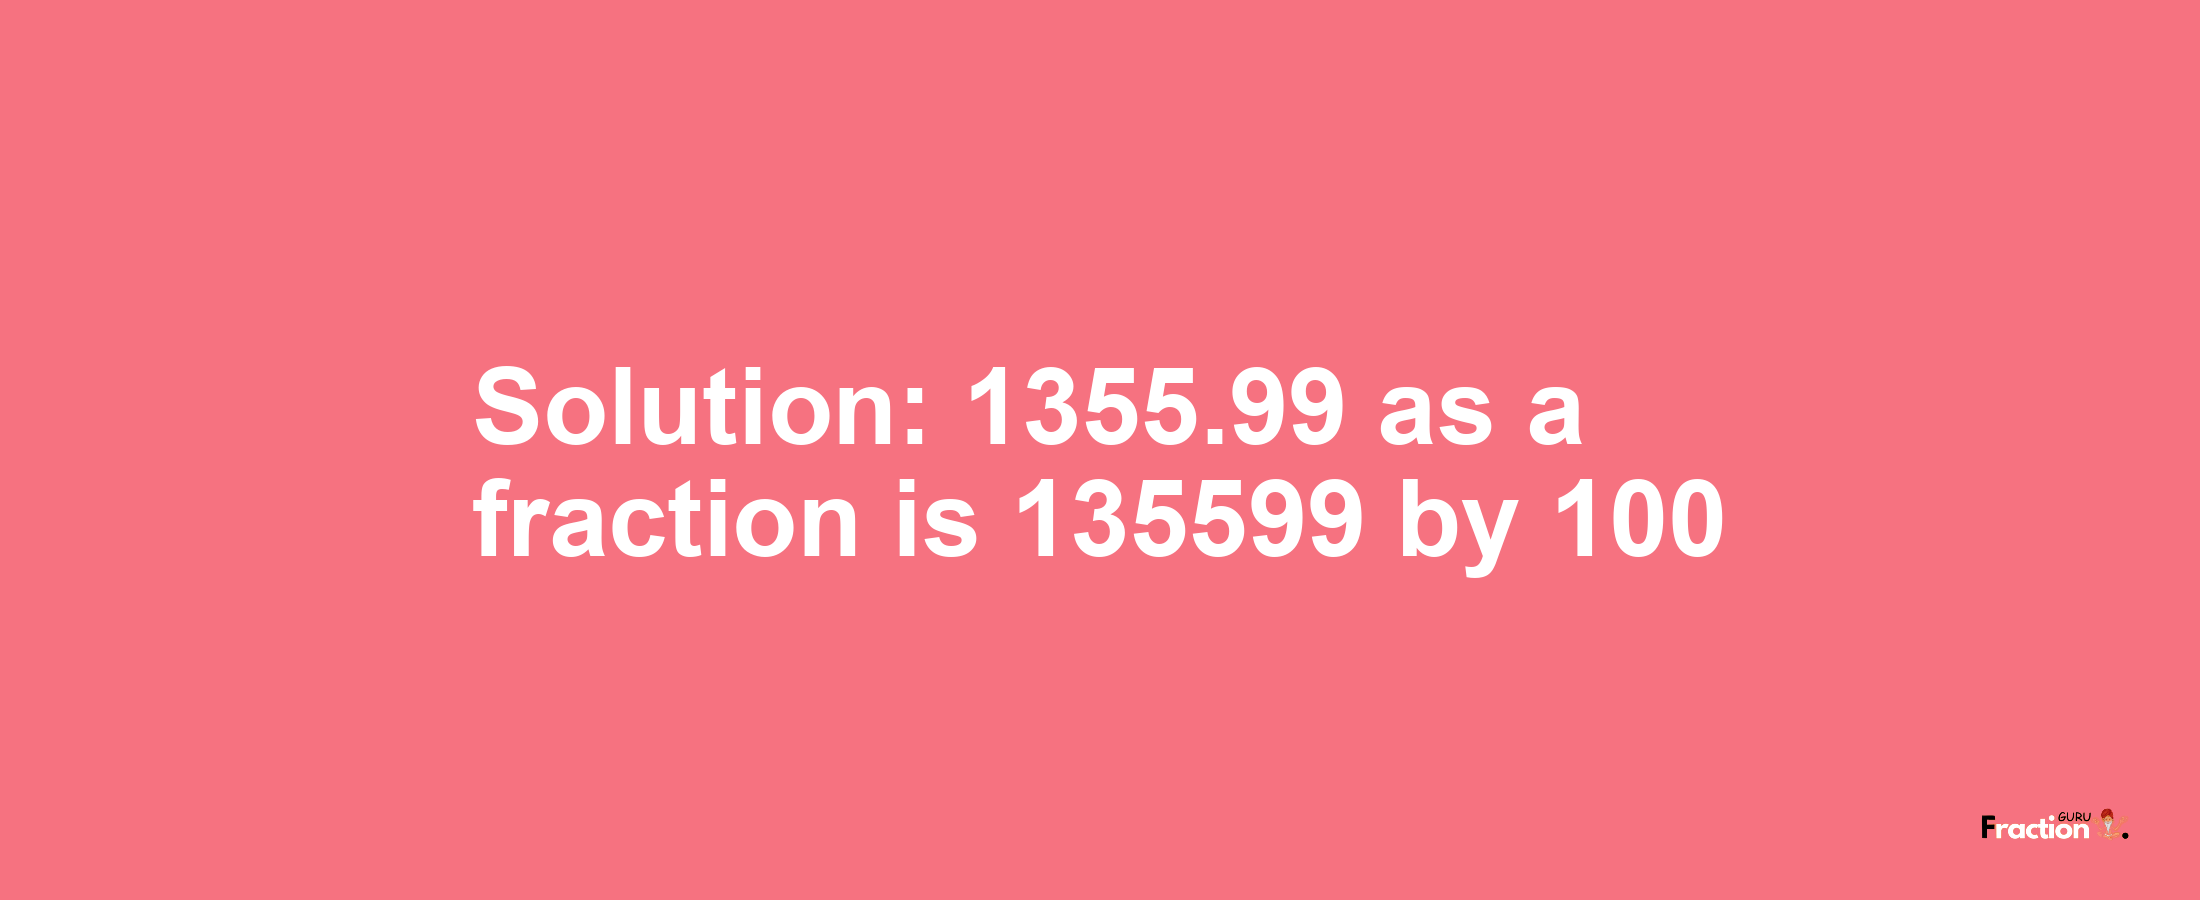 Solution:1355.99 as a fraction is 135599/100